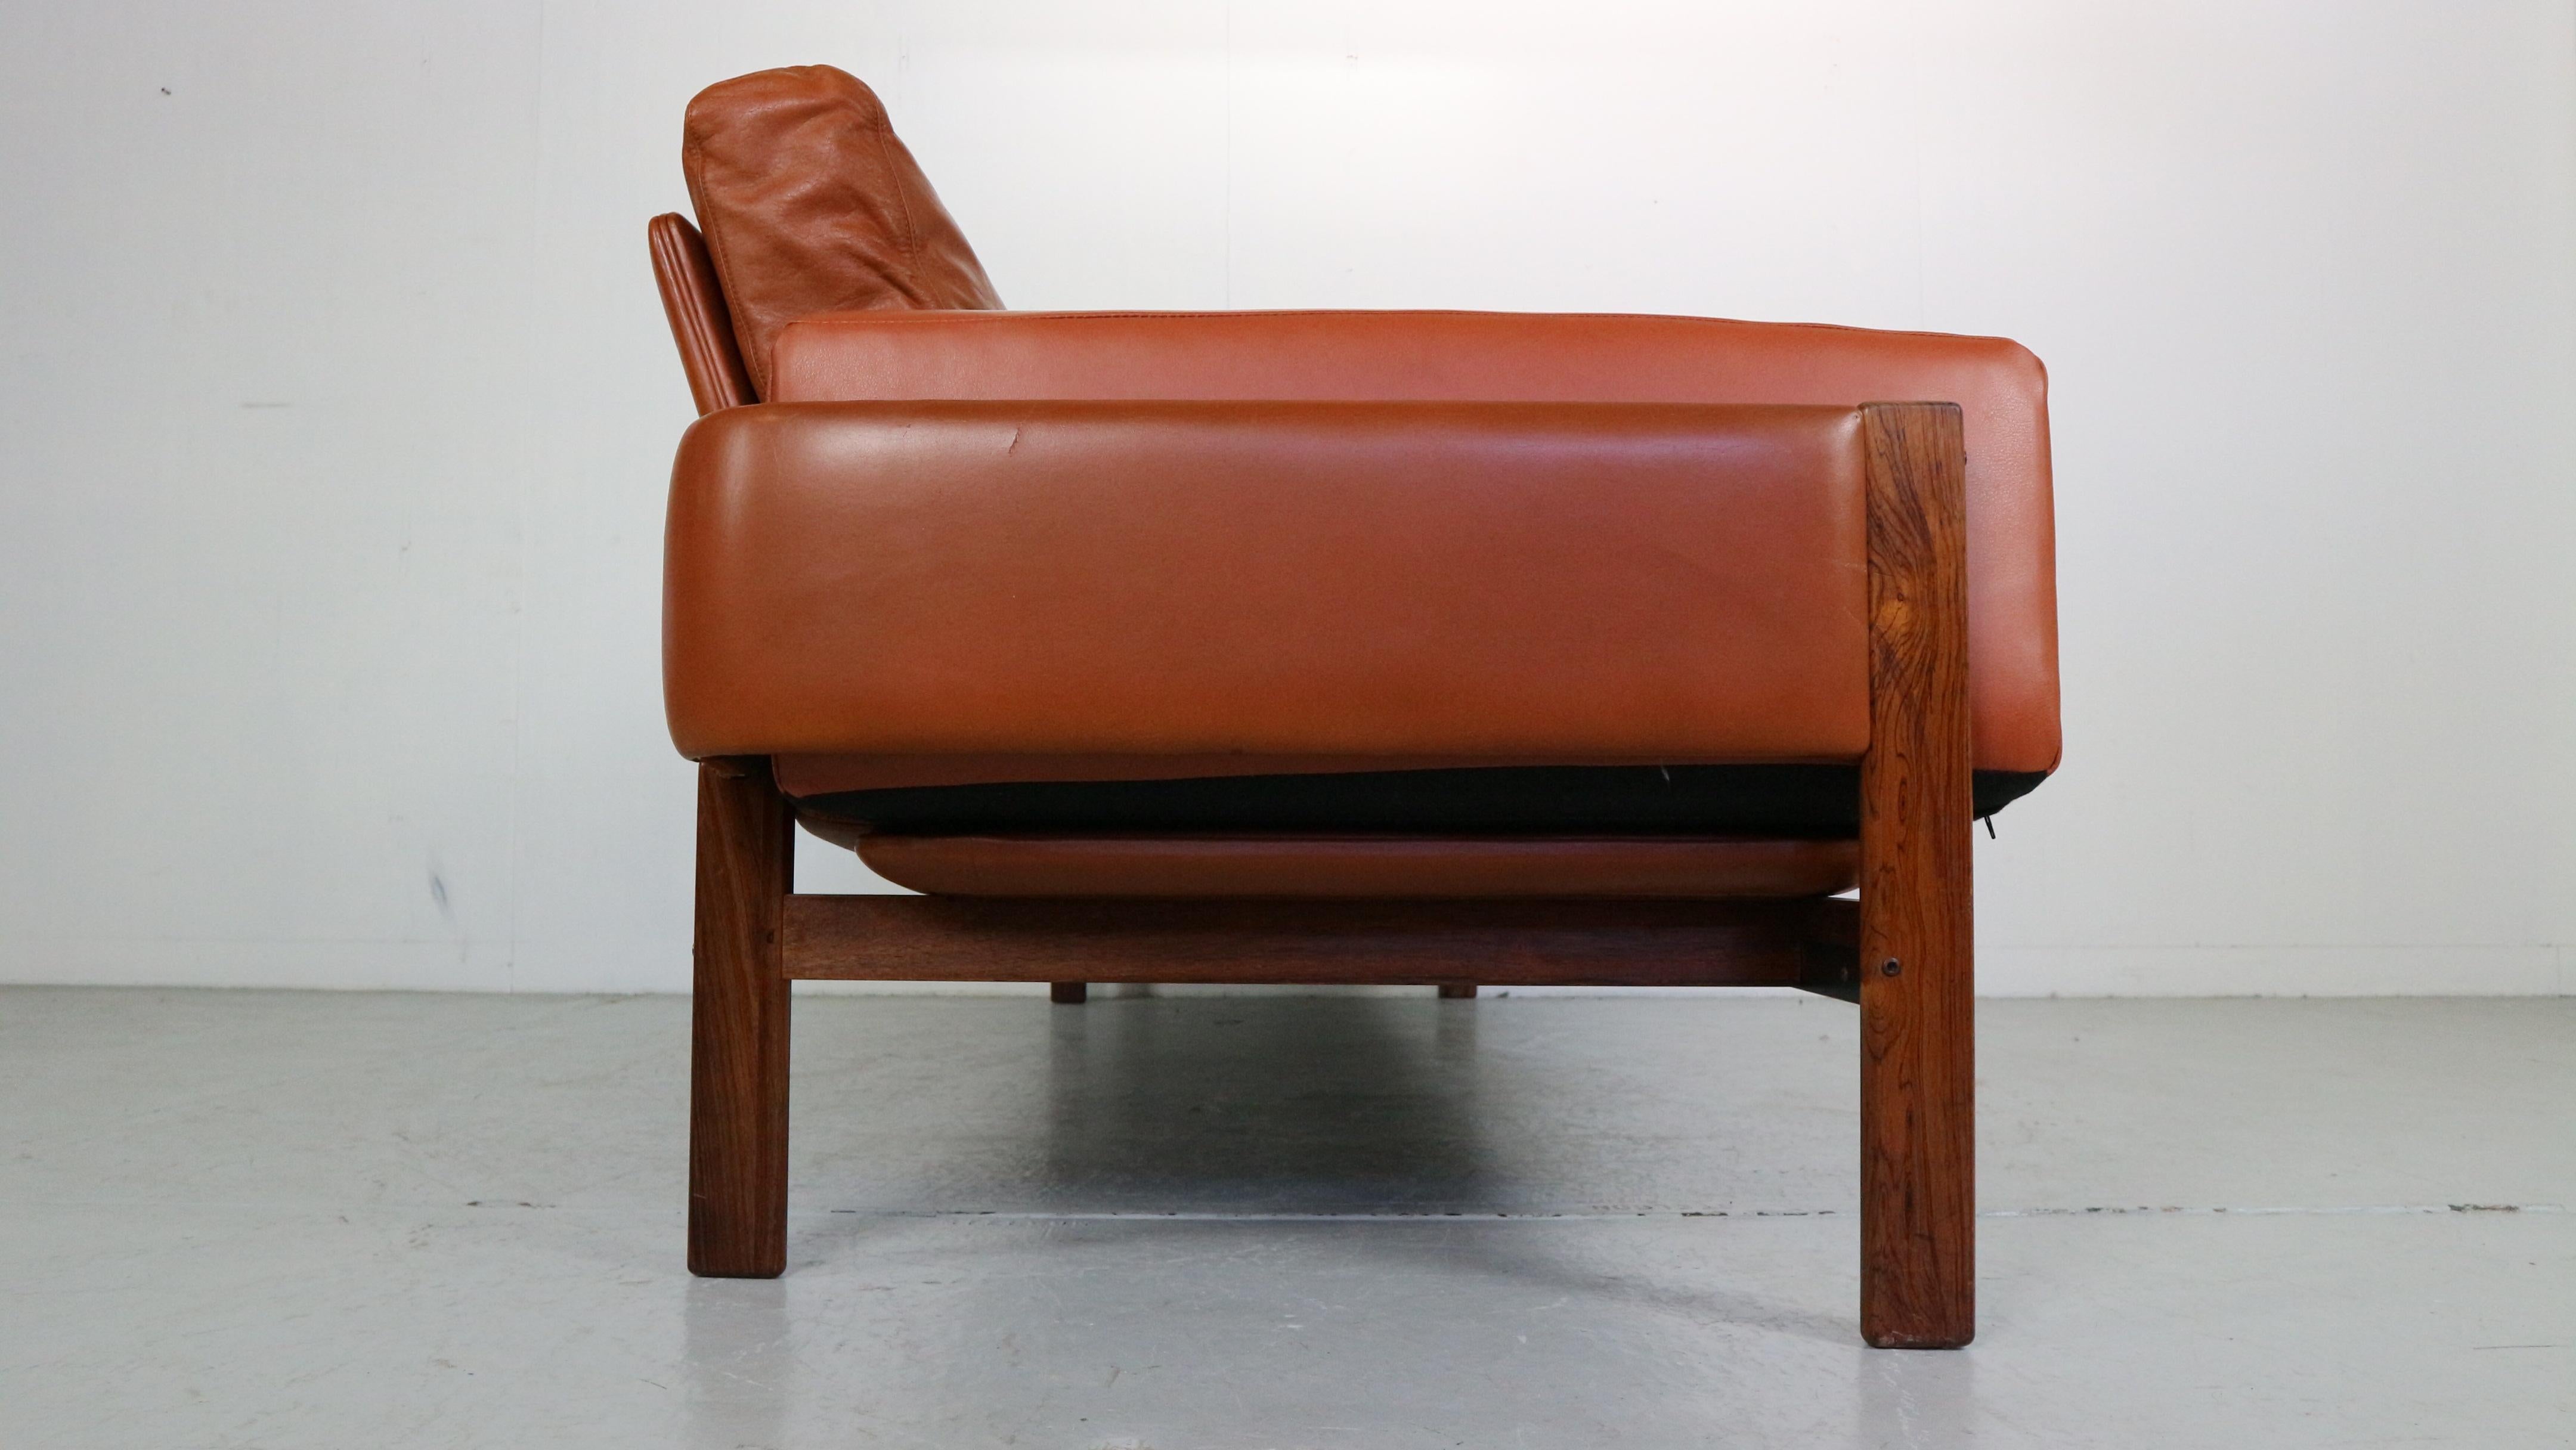 Mid-20th Century Sven Ivar Dysthe  4-Seater Congac Leather Sofa for Dokka Møbler, 1960's Norway